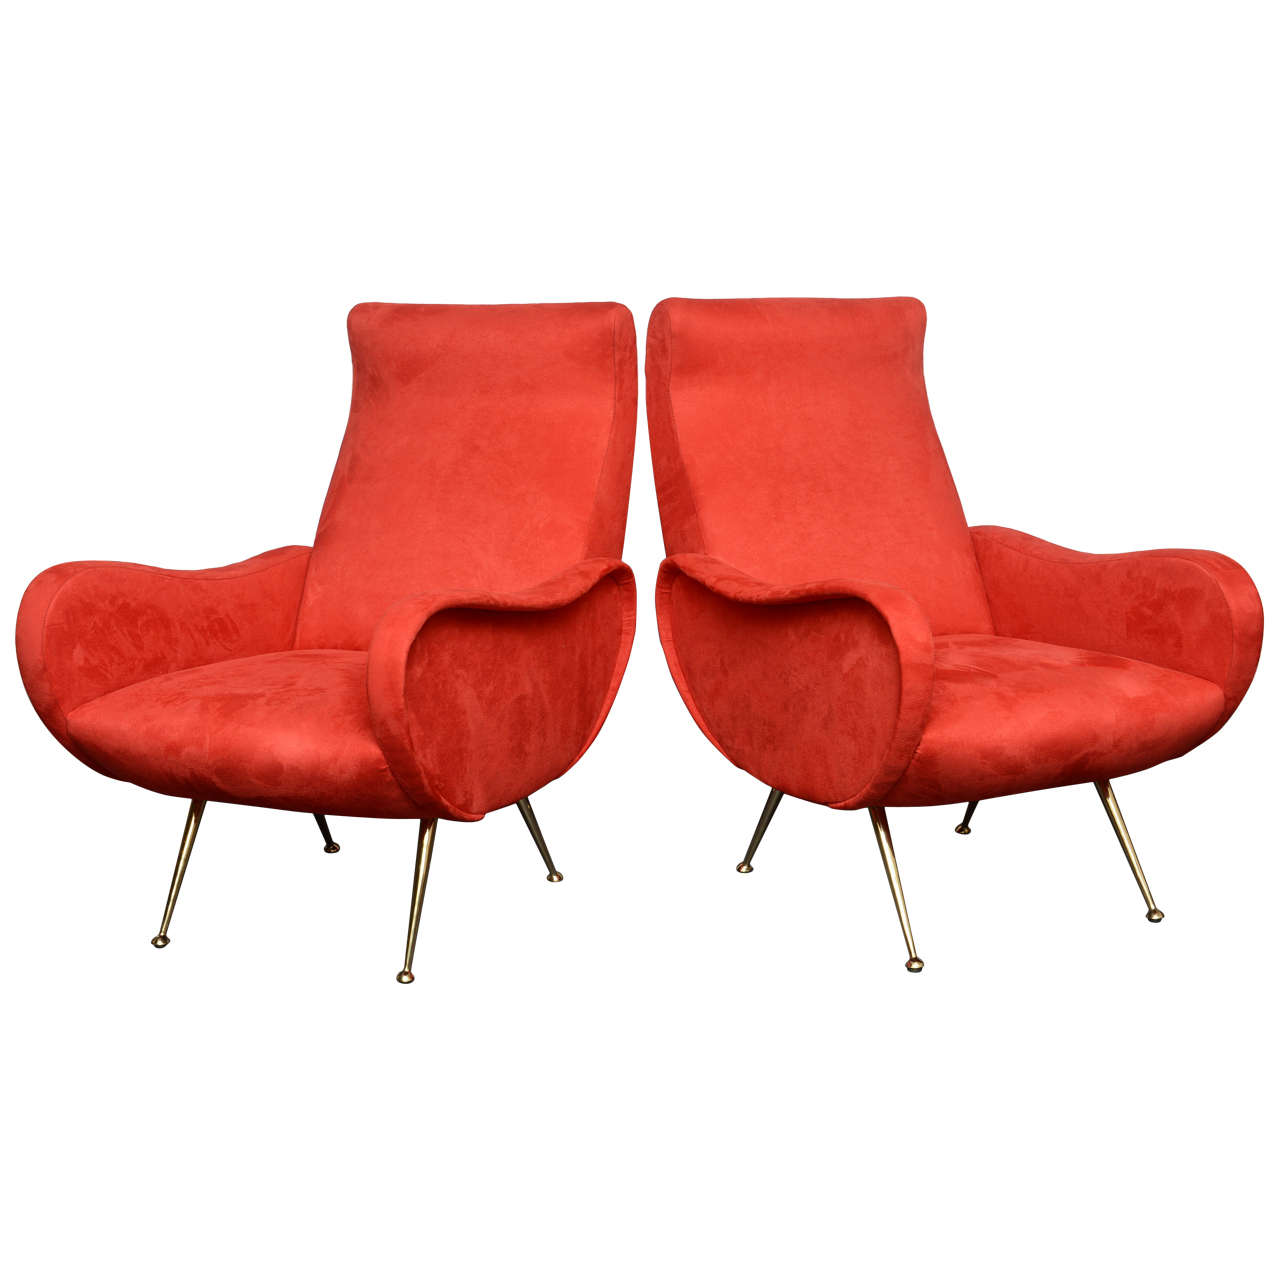 Midcentury Marco Zanusso Style Red Lounge Chairs